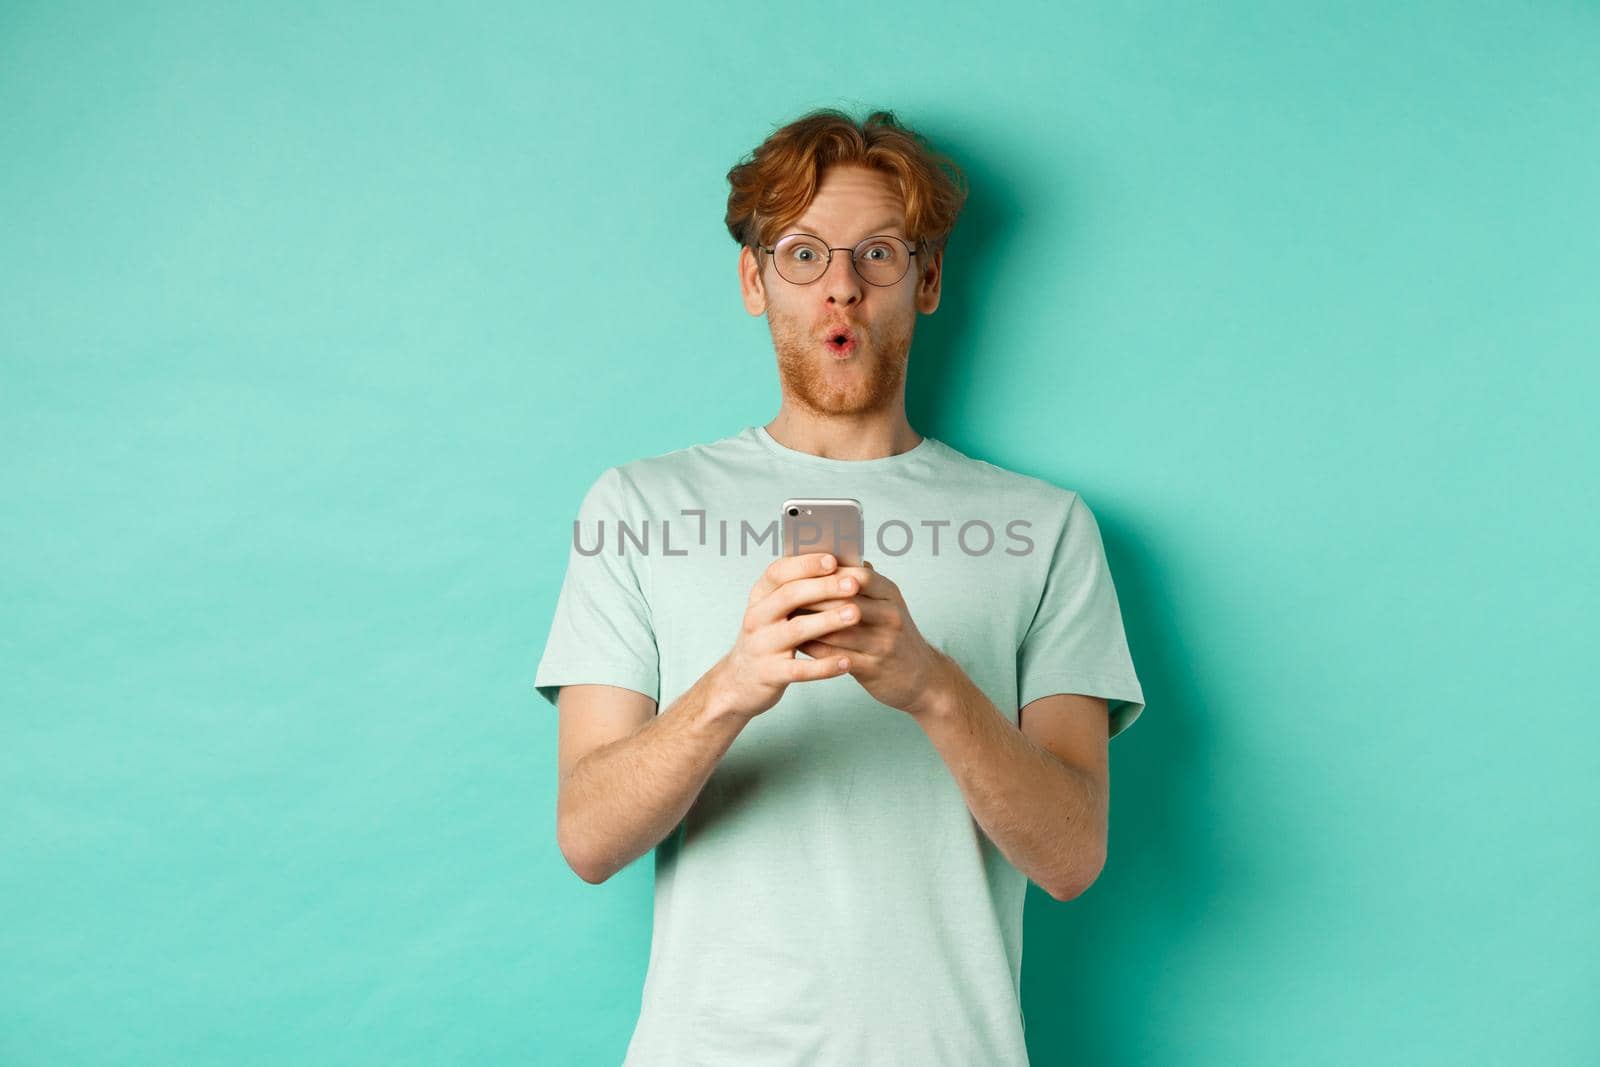 Impressed young man with red hair and glasses, holding mobile phone, saying wow and stare amazed at camera, standing over mint background.